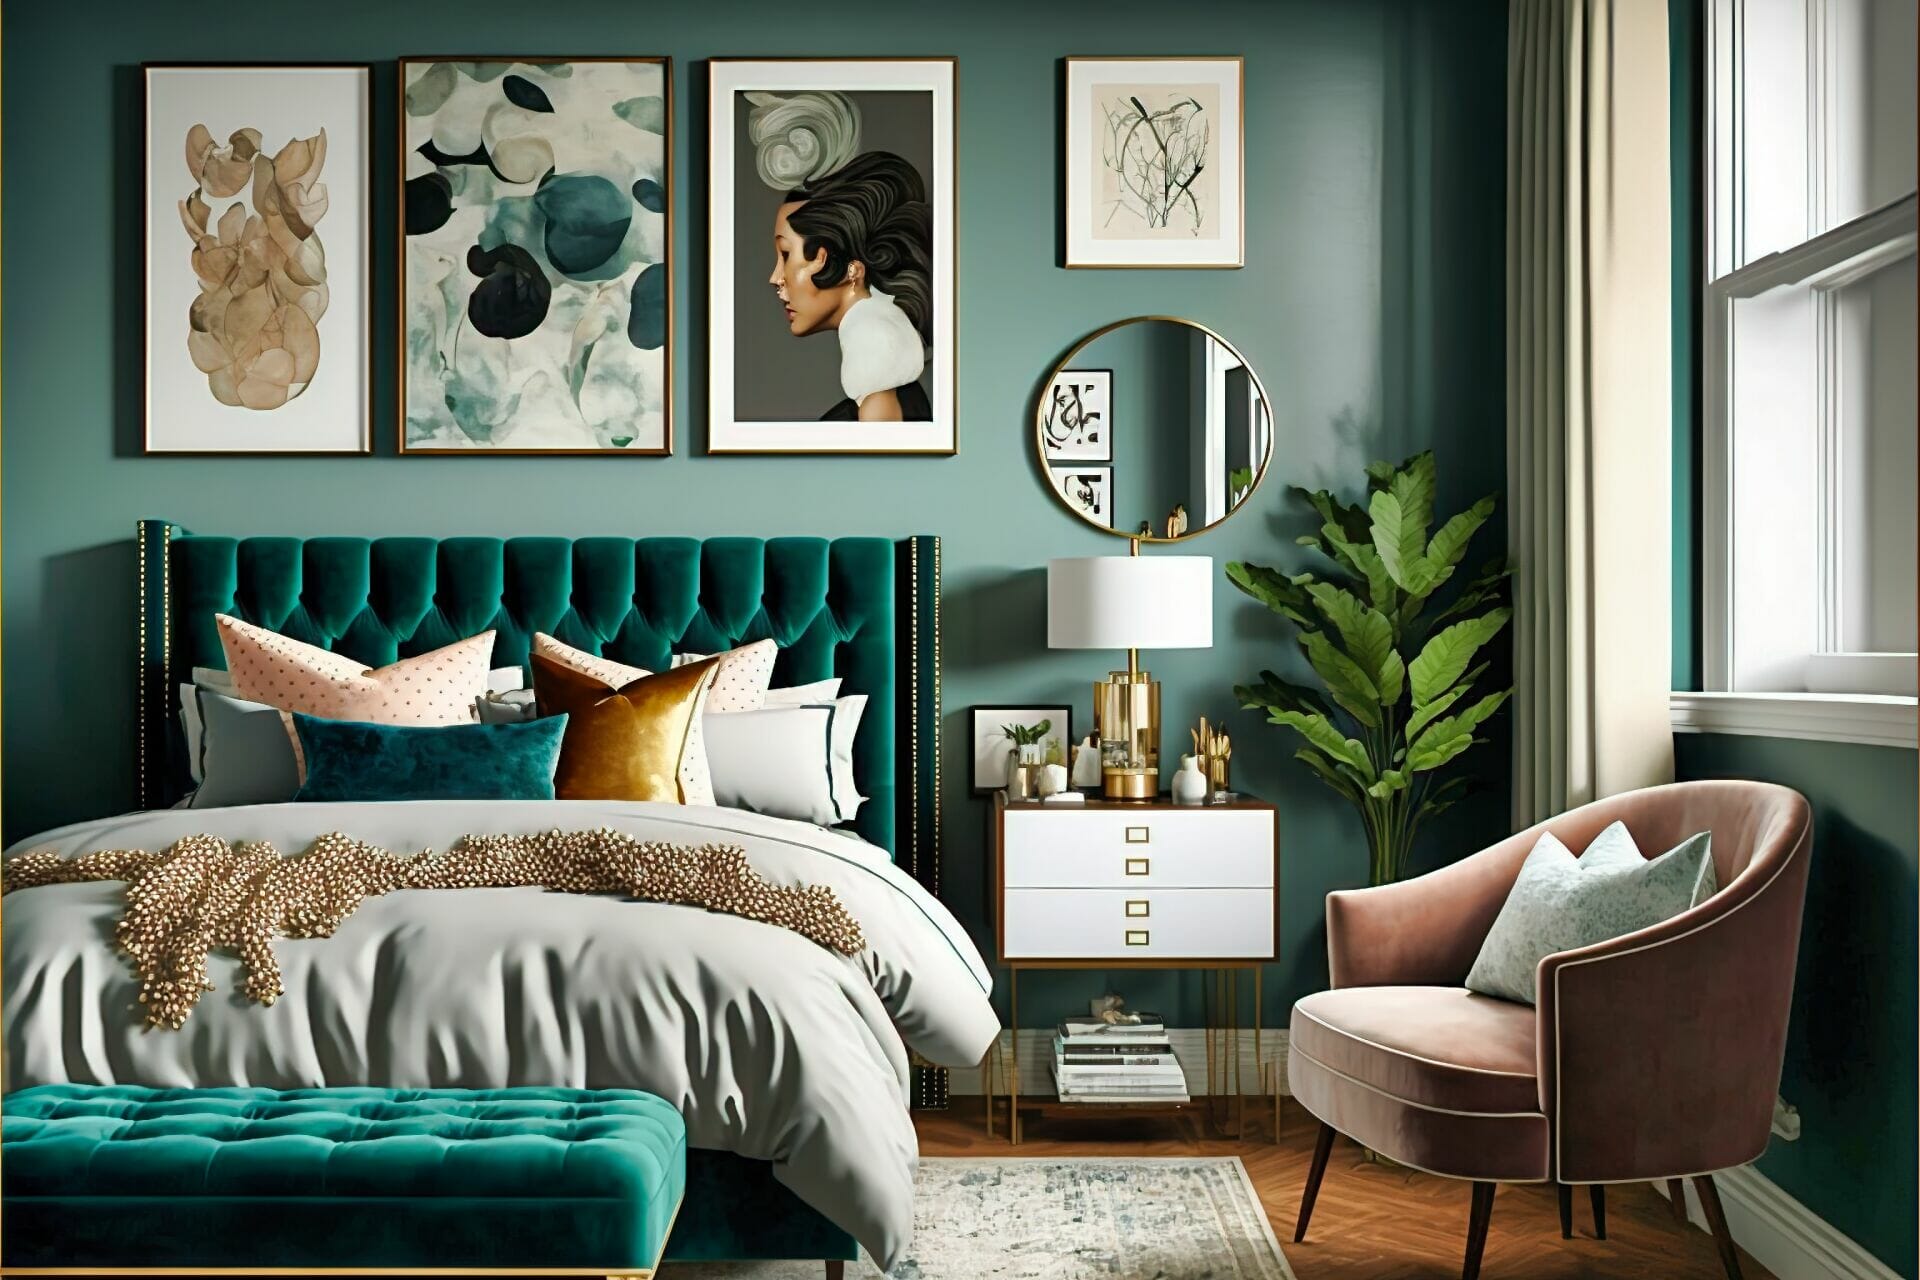 Mid-Century Modern Bedroom – A Glamorous Modern Bedroom Featuring A Tufted Velvet Bed Frame, A Mirrored Dresser, And A Gallery Wall Of Art Deco Prints.